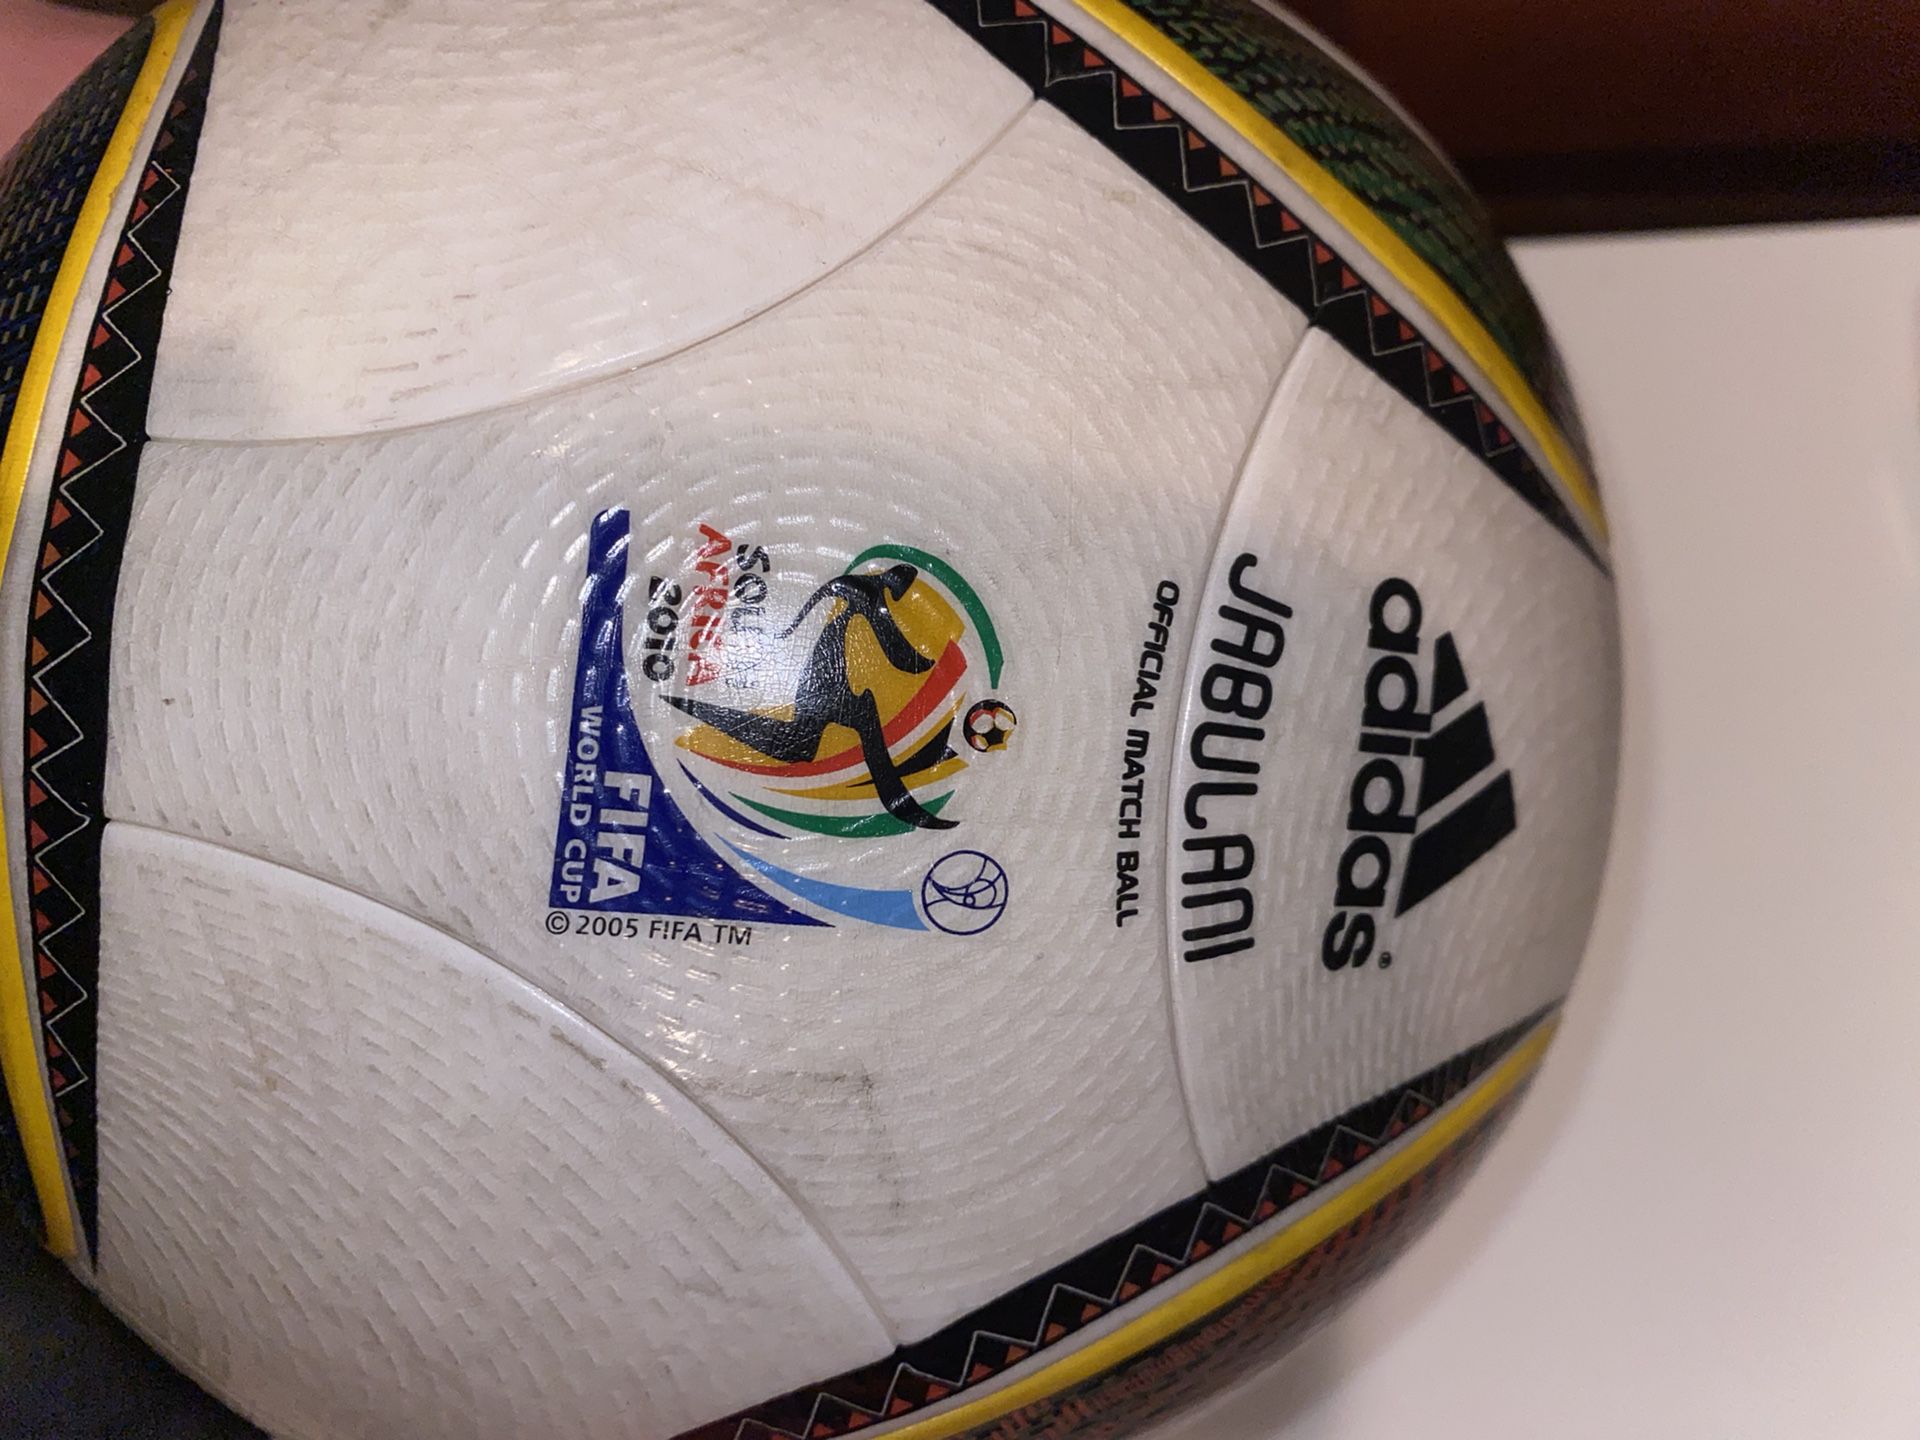 JABULANI Official Match Ball (100% Authentic) for Sale Florham NJ - OfferUp